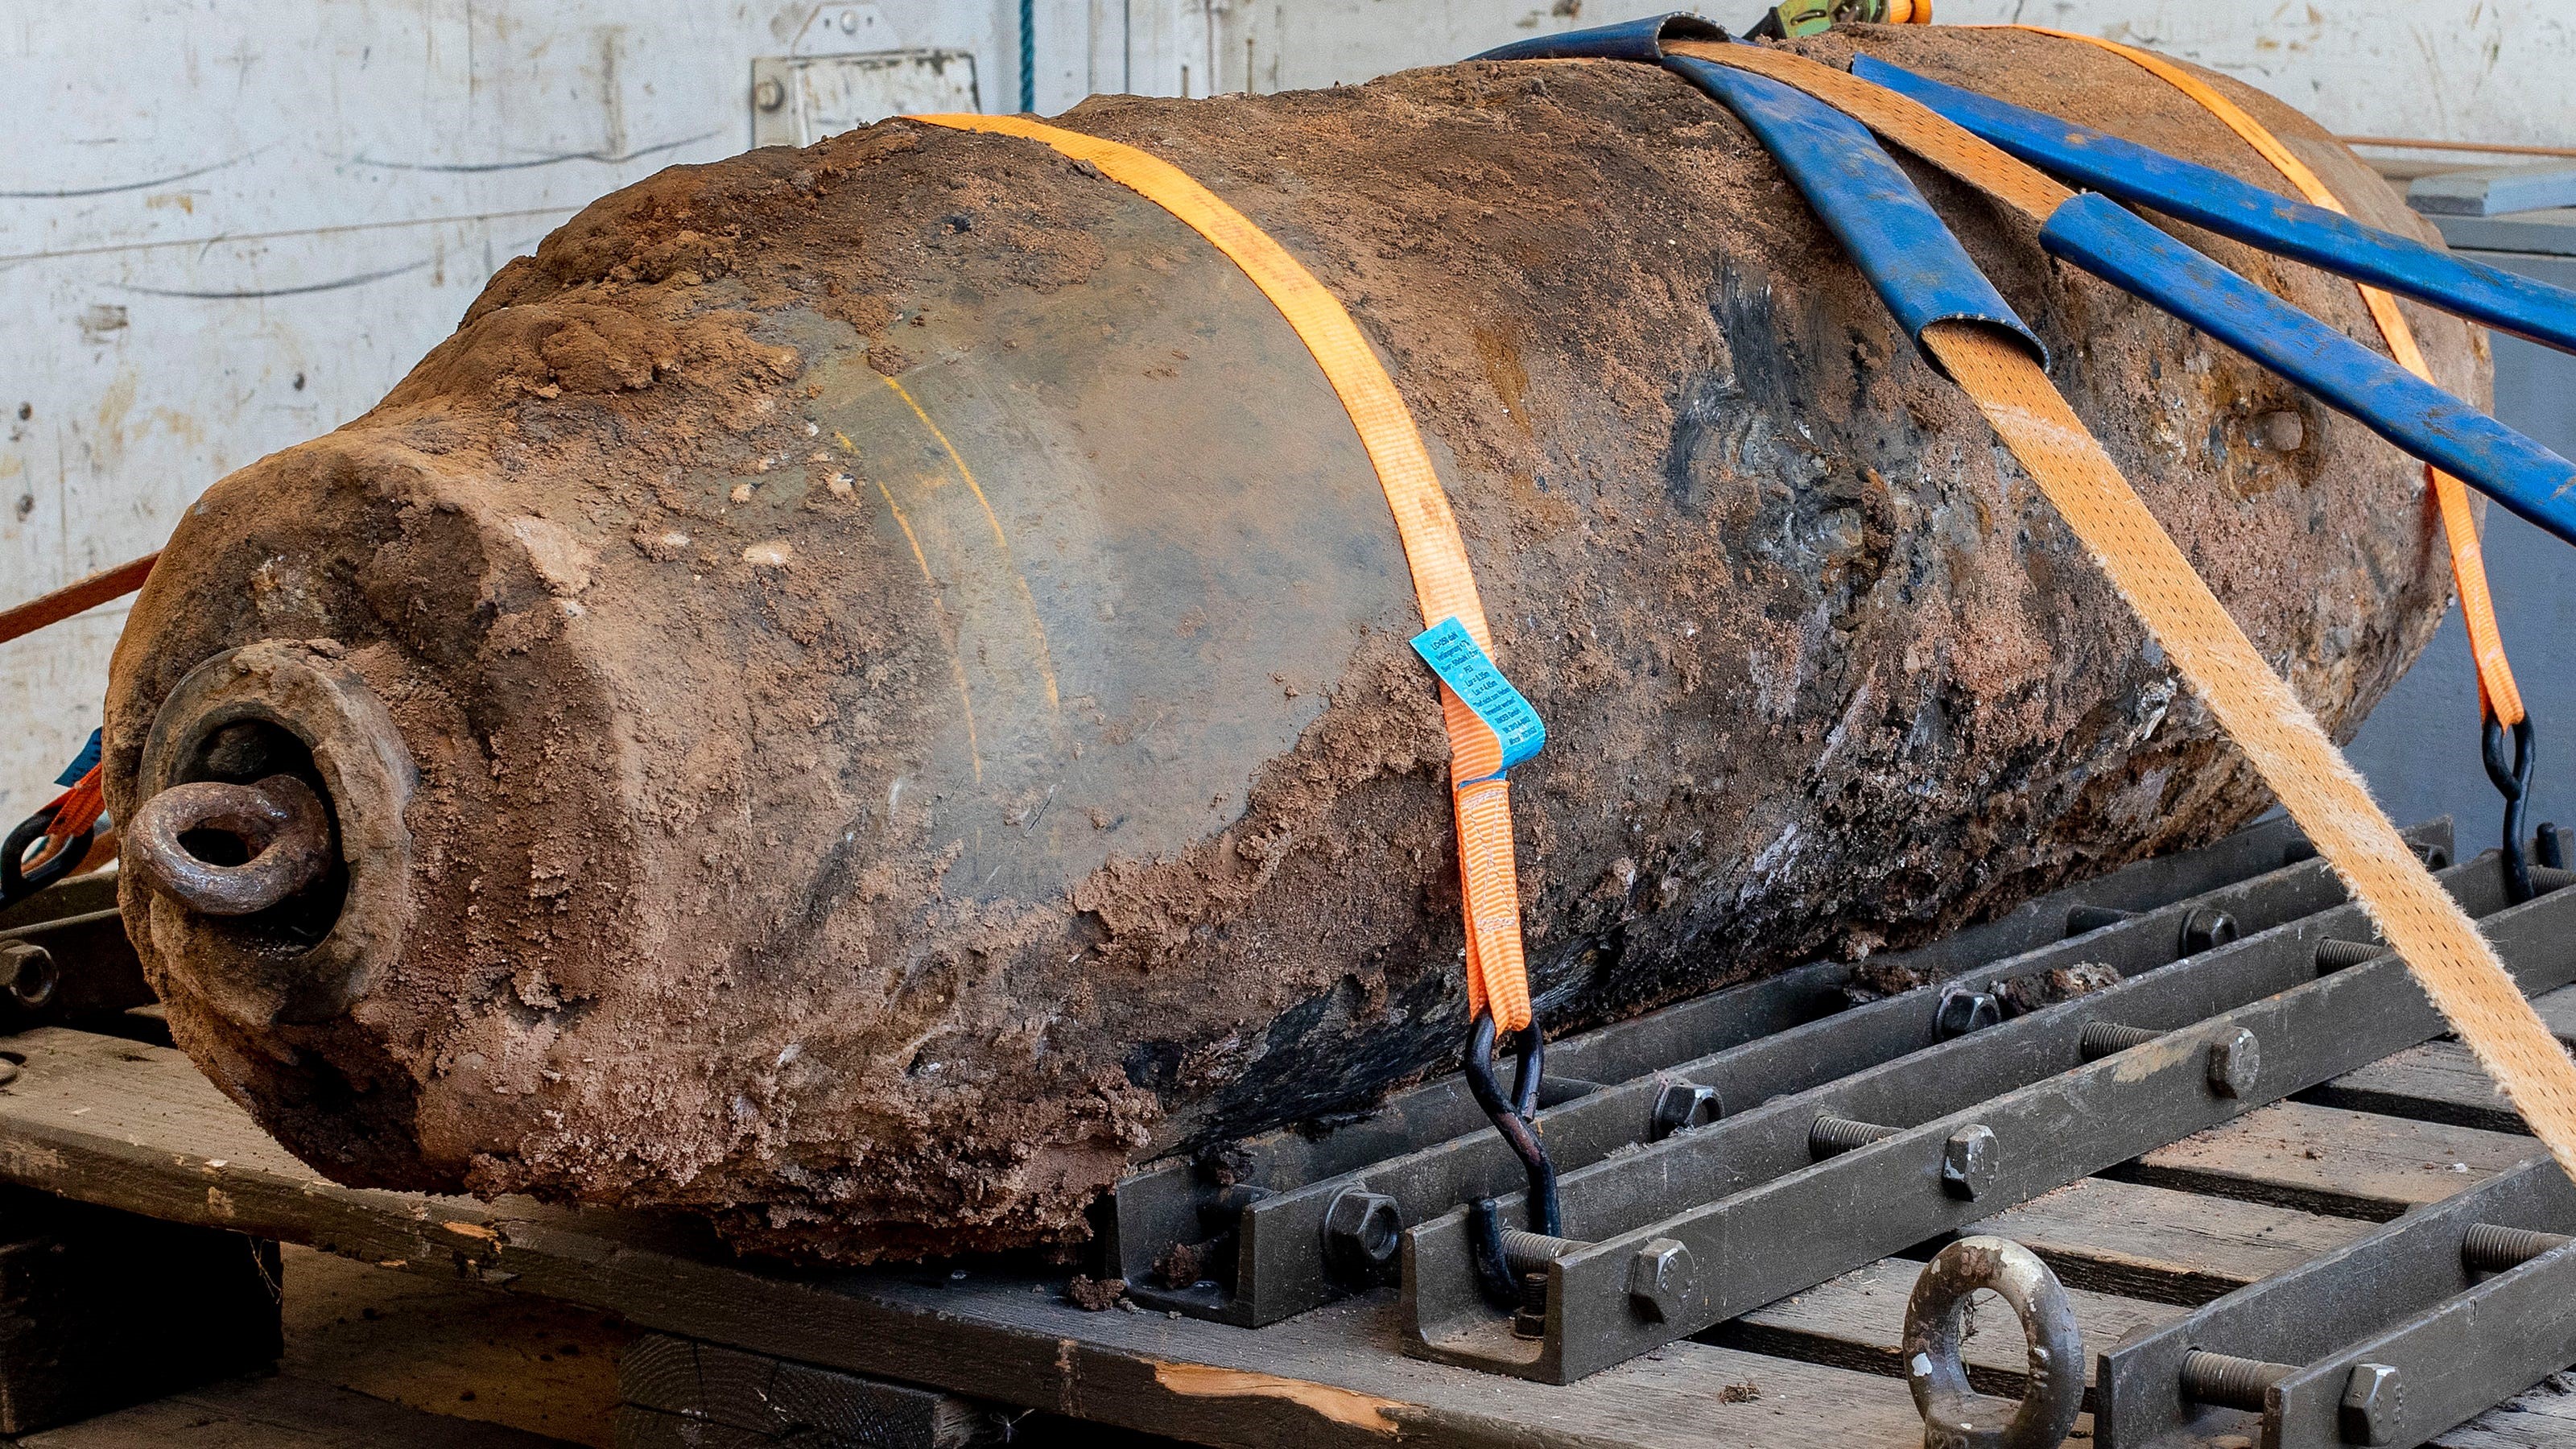 13,000 evacuated in Germany after WWII bomb found